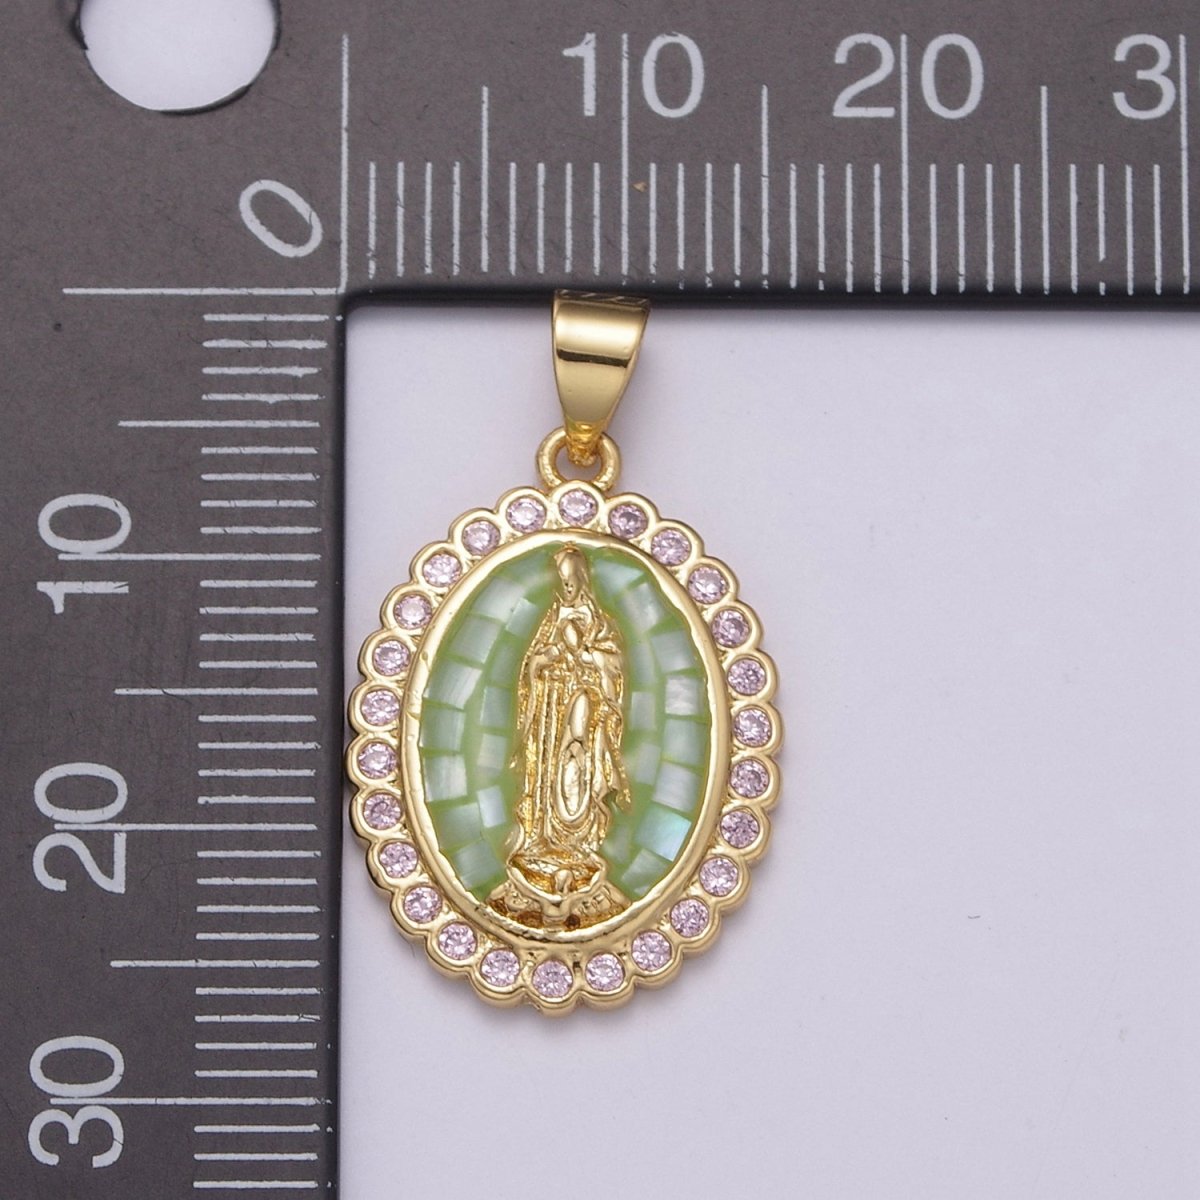 Blue / Green Virgin Mary Charm for Necklace, Dainty Lady Guadalupe Pendant for Religious Jewelry Making Supply in Gold Filled H-057 H-059 - DLUXCA